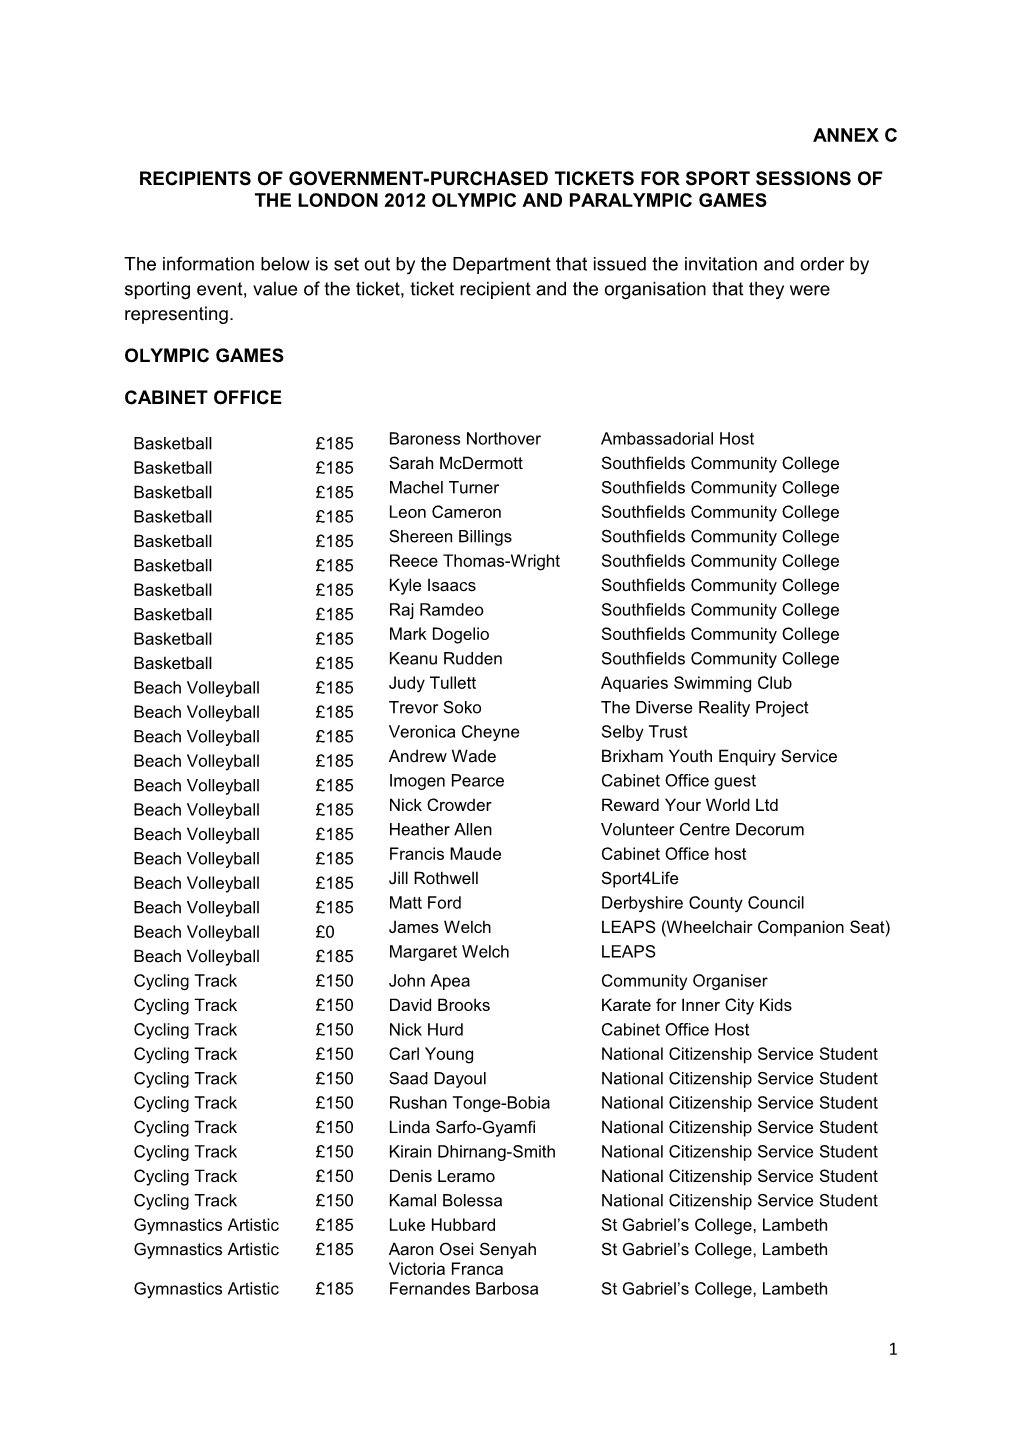 Recipients of Government-Purchased Tickets for Sport Sessions of the London 2012 Olympic